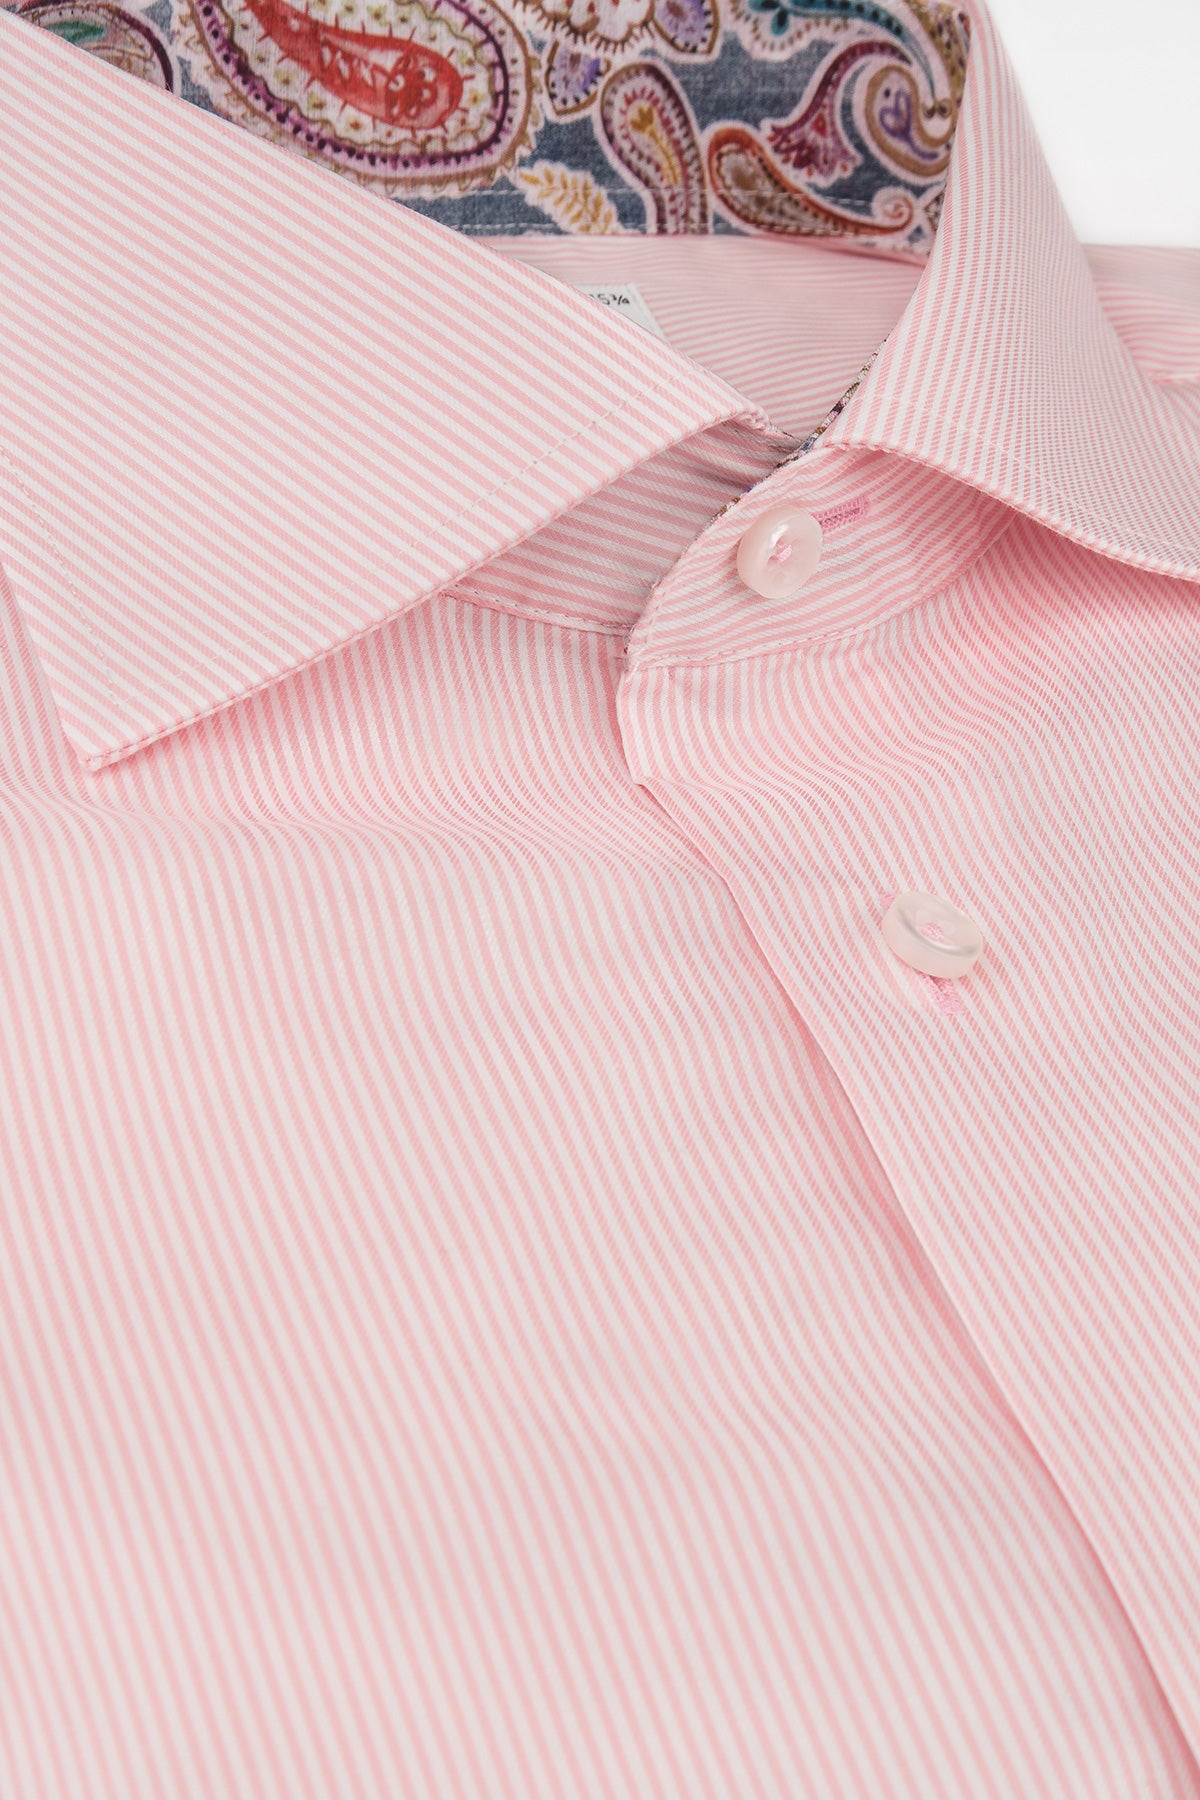 Pink striped extra long sleeves regular fit shirt with contrast details